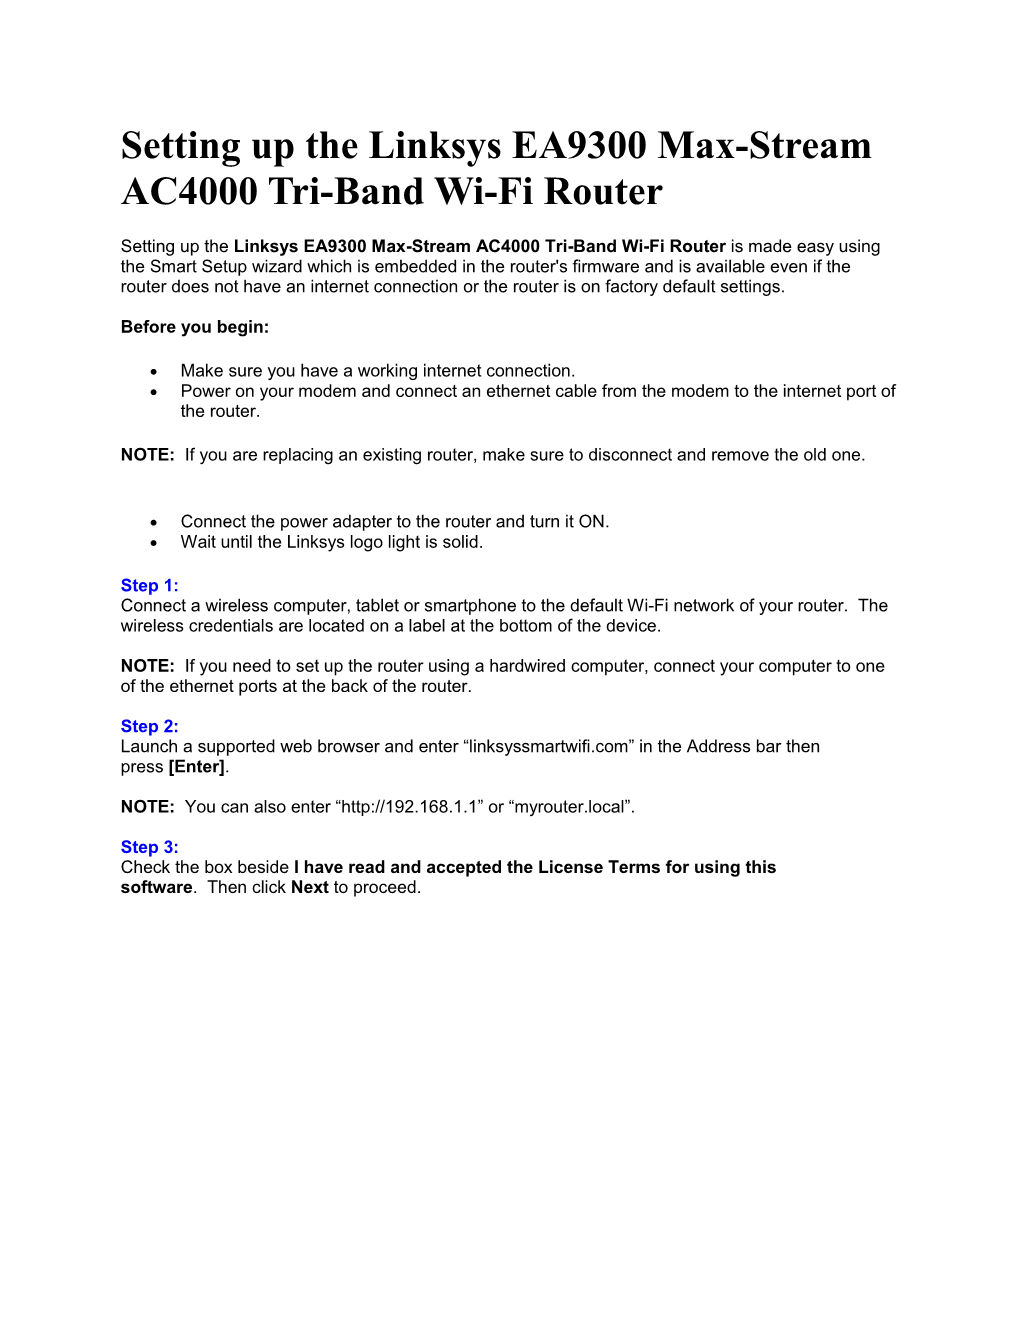 Setting up the Linksys EA9300 Max-Stream AC4000 Tri-Band Wi-Fi Router